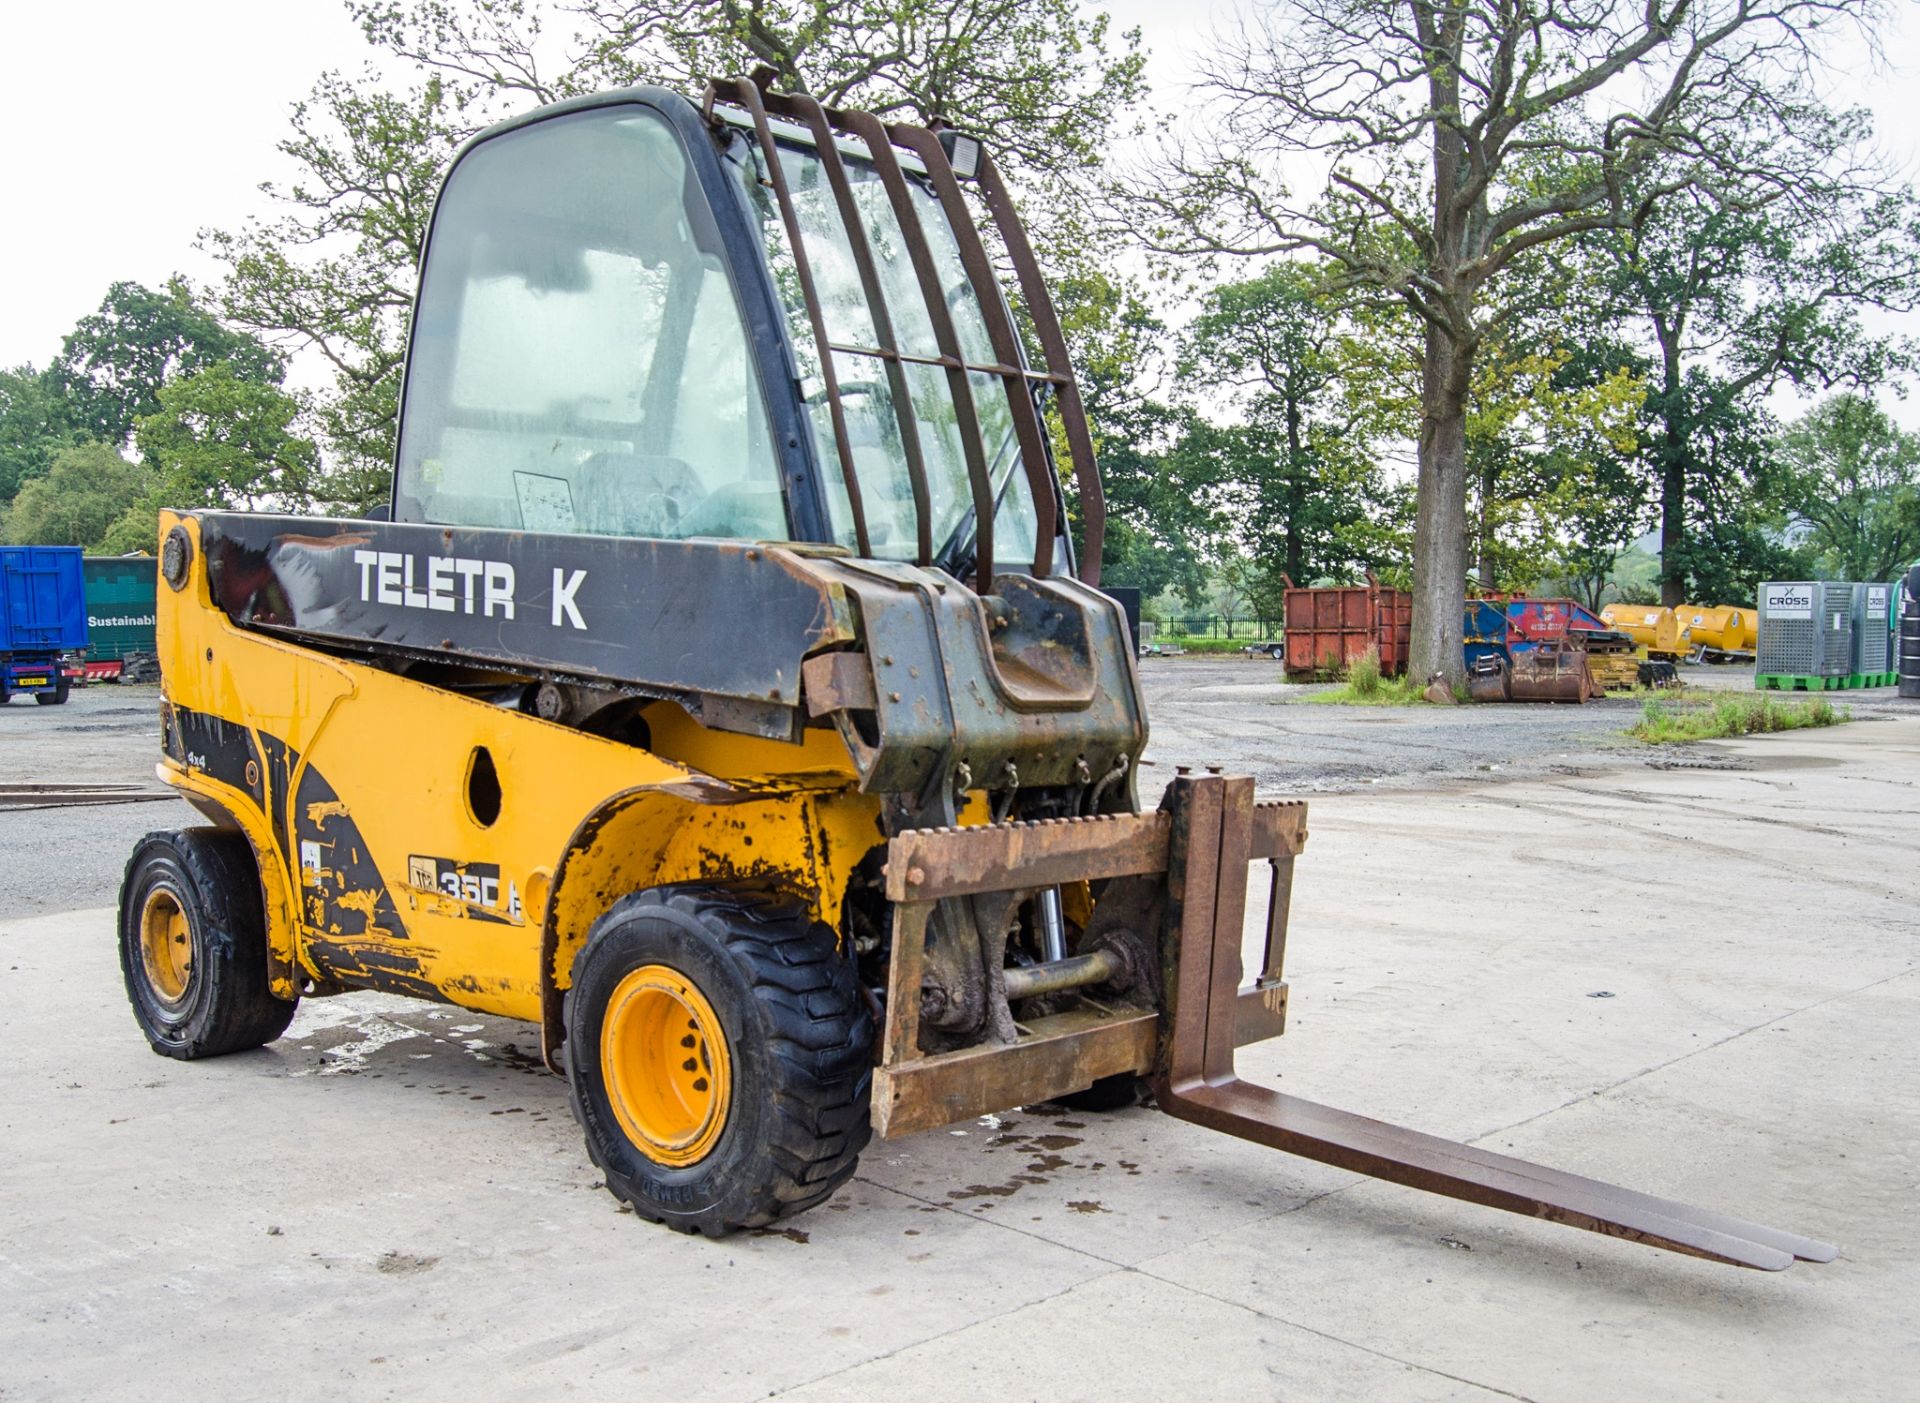 JCB Teletruk 35D 4x4 telescopic truck Year: 2009 S/N: 1539185 Recorded Hours: 565 ** Machine - Image 2 of 22